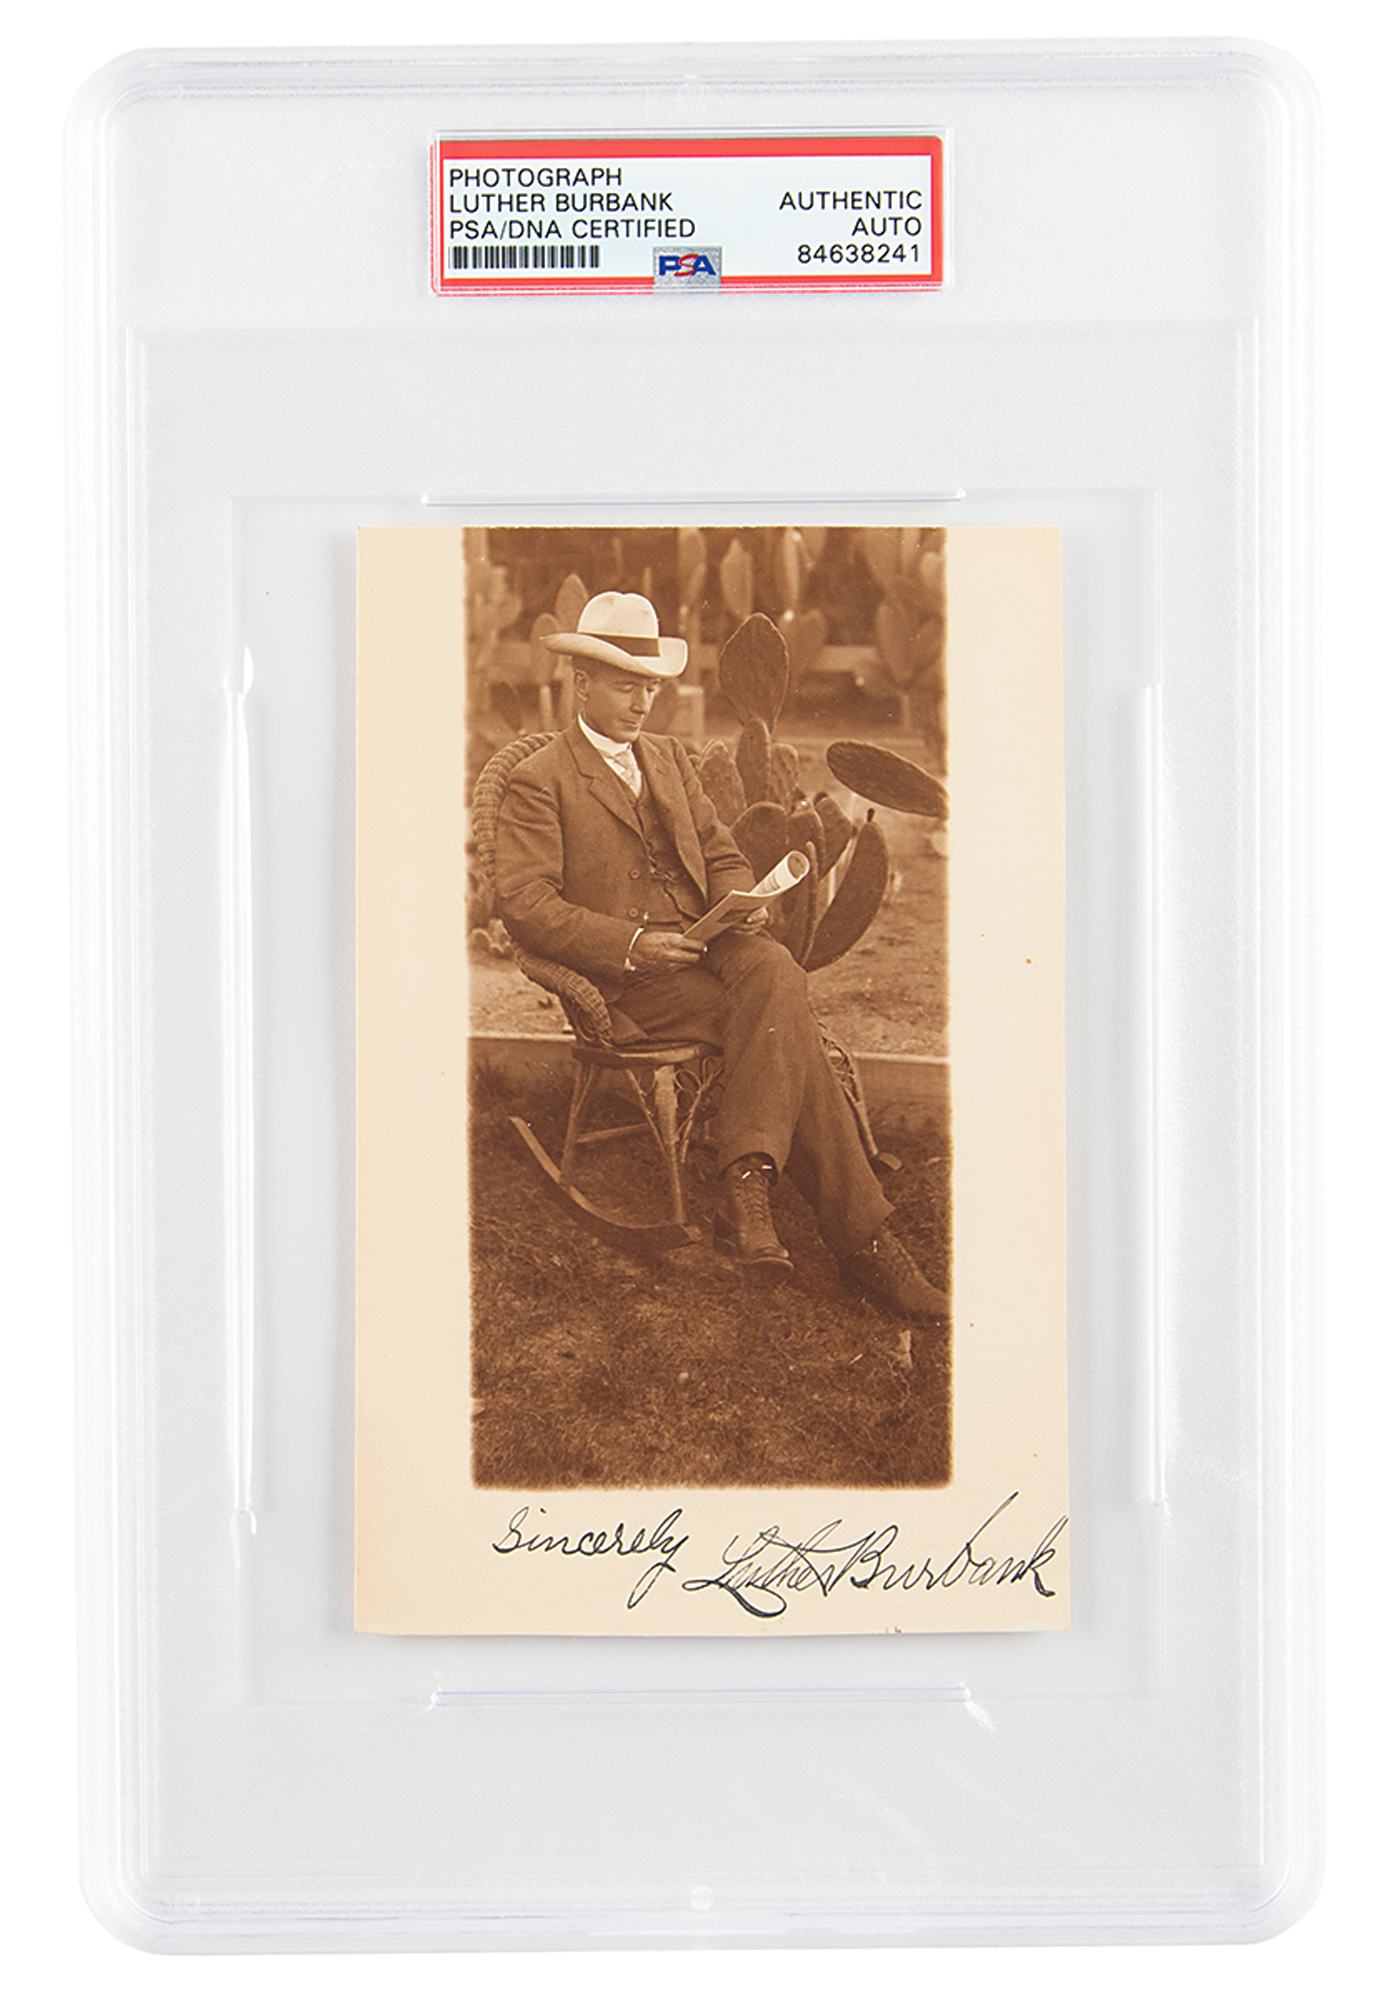 Lot #6169 Luther Burbank Signed Photograph